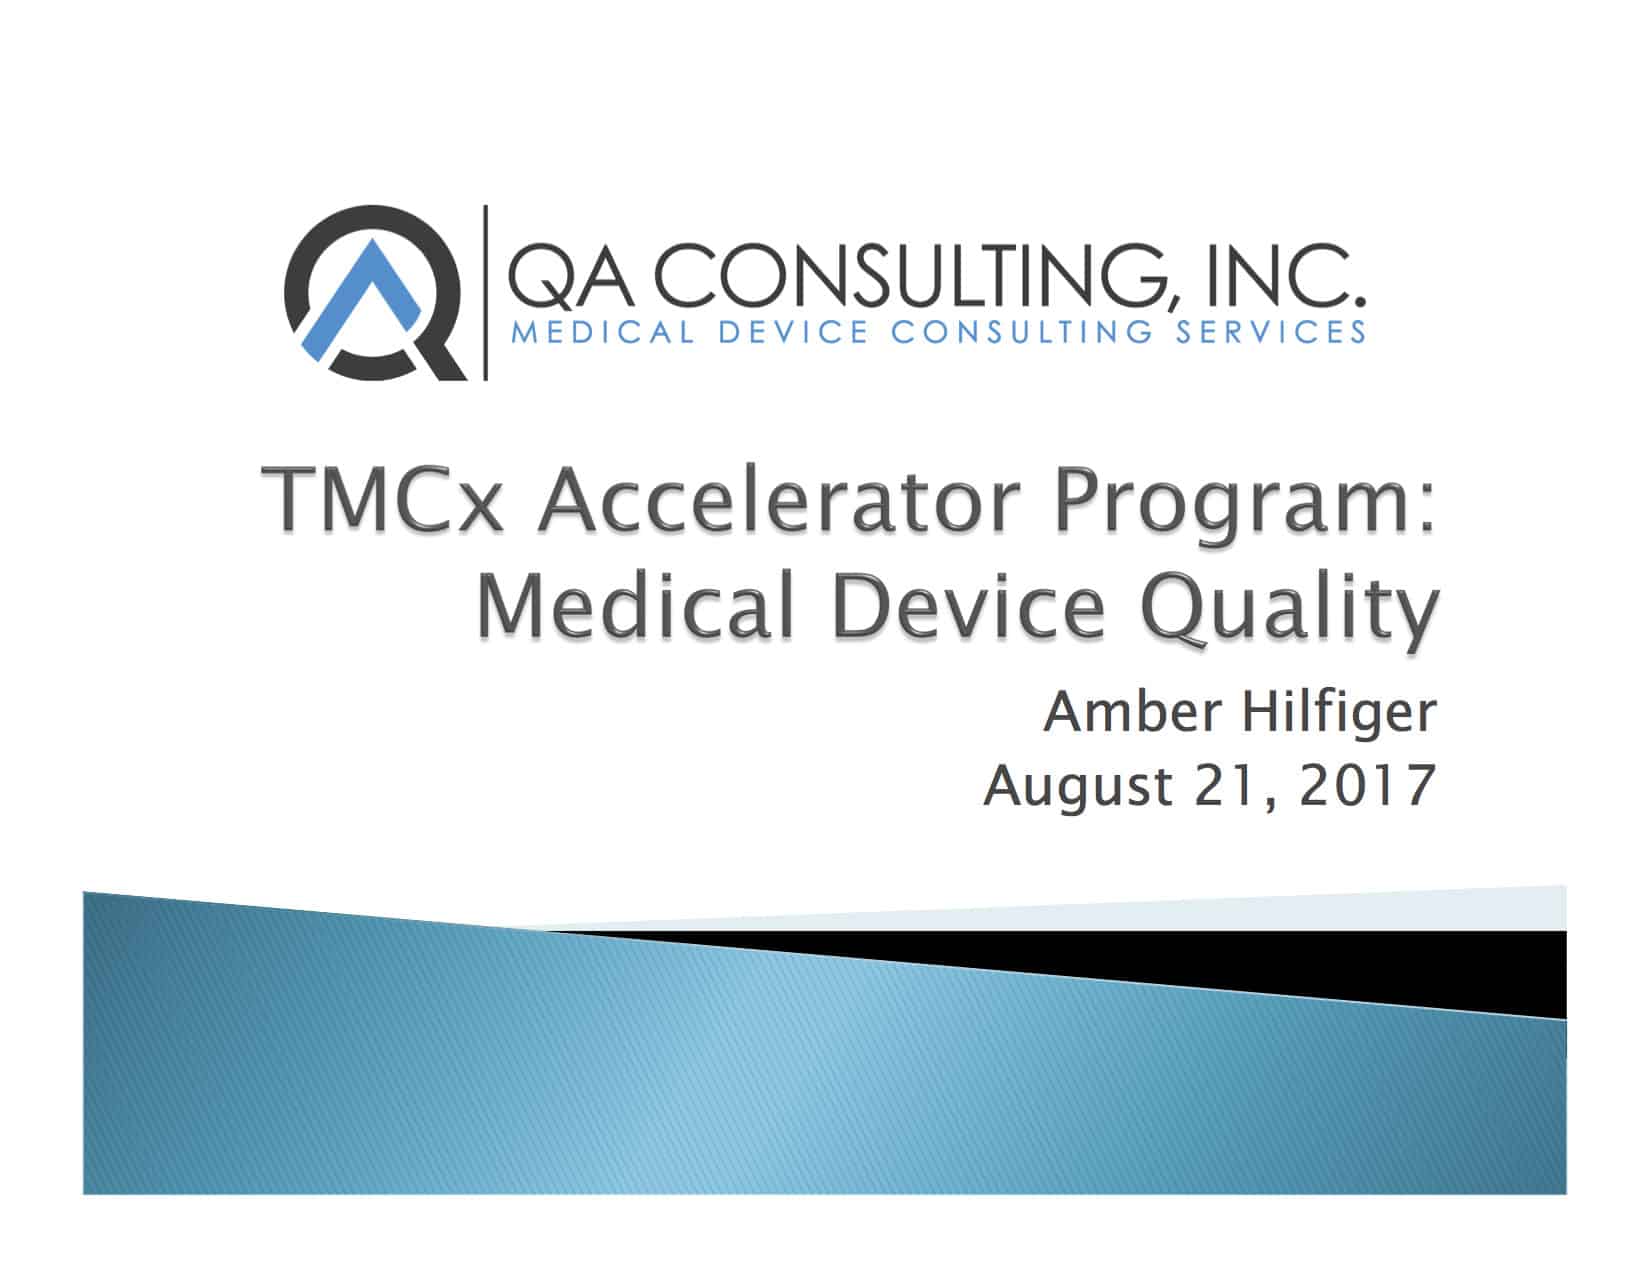 QA Consulting, Inc. Presents at TMCx in Houston